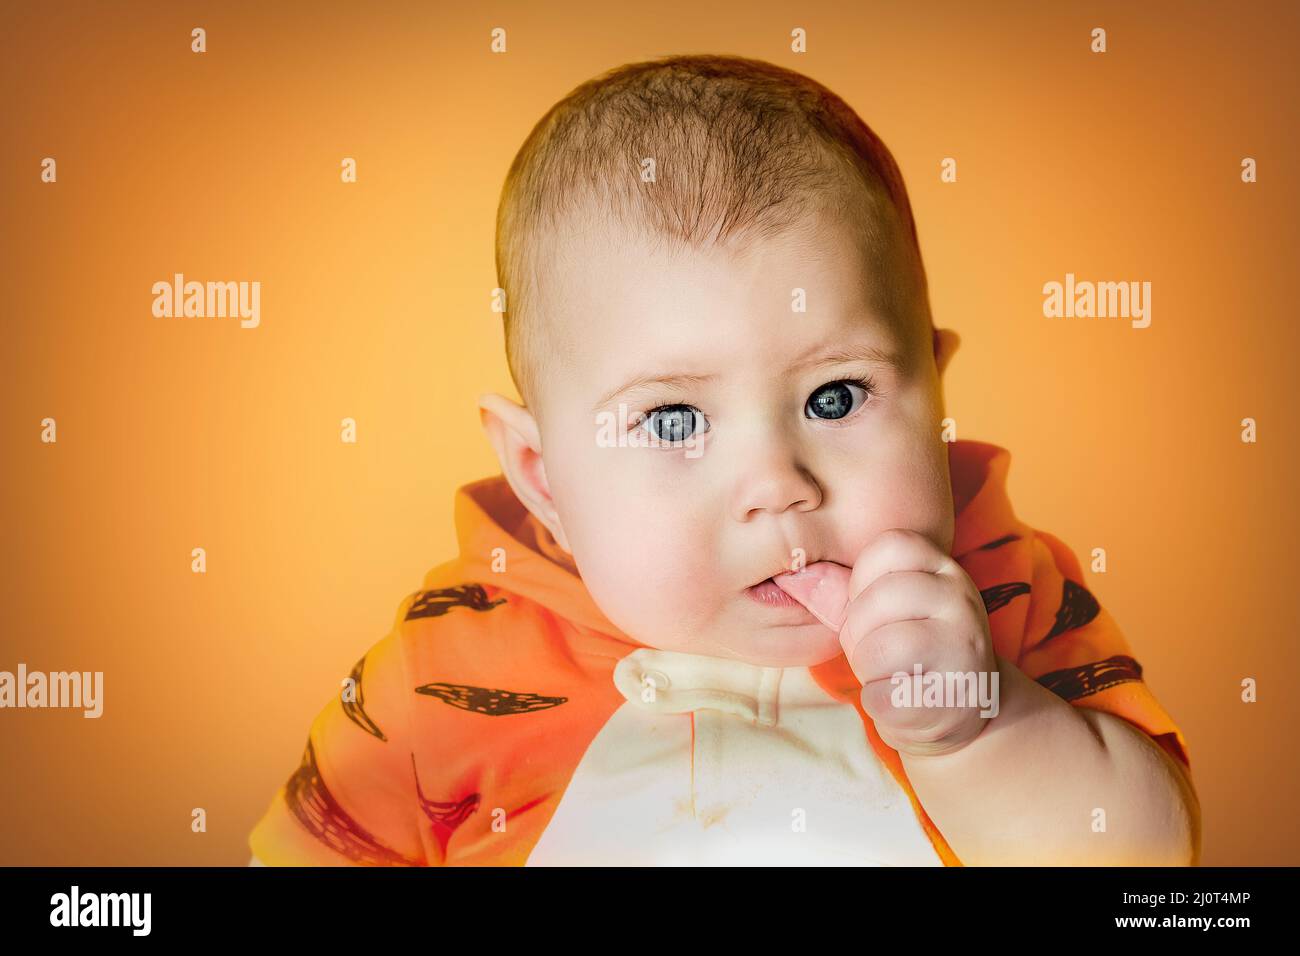 Little Cute Baby in Tiger Costume Symbol New Year Stock Photo